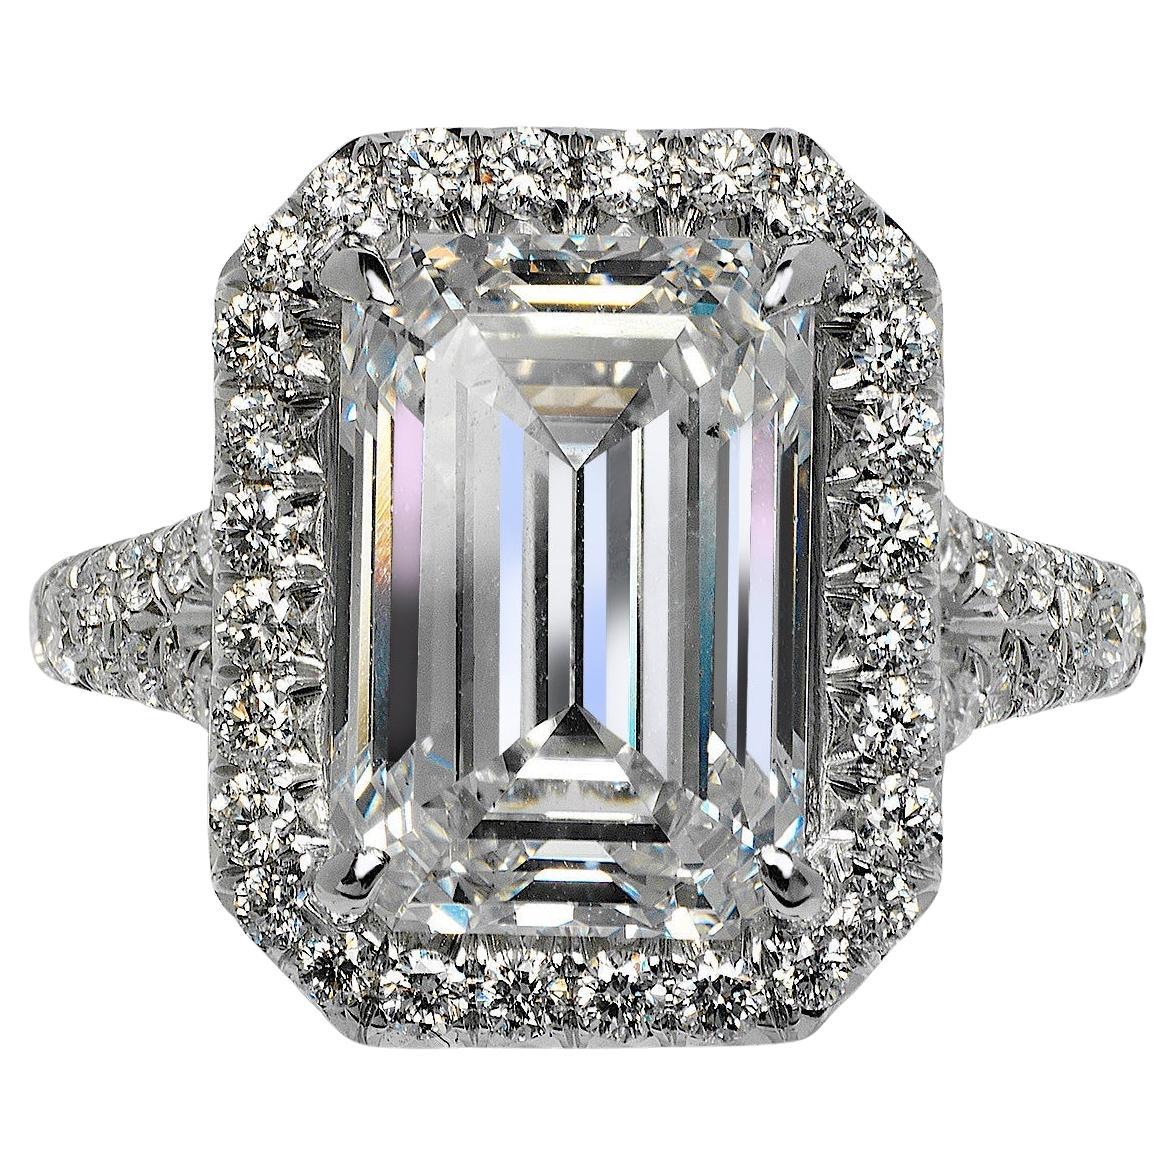 4 Carat Emerald Cut Diamond Engagement Ring GIA Certified F SI1 For Sale